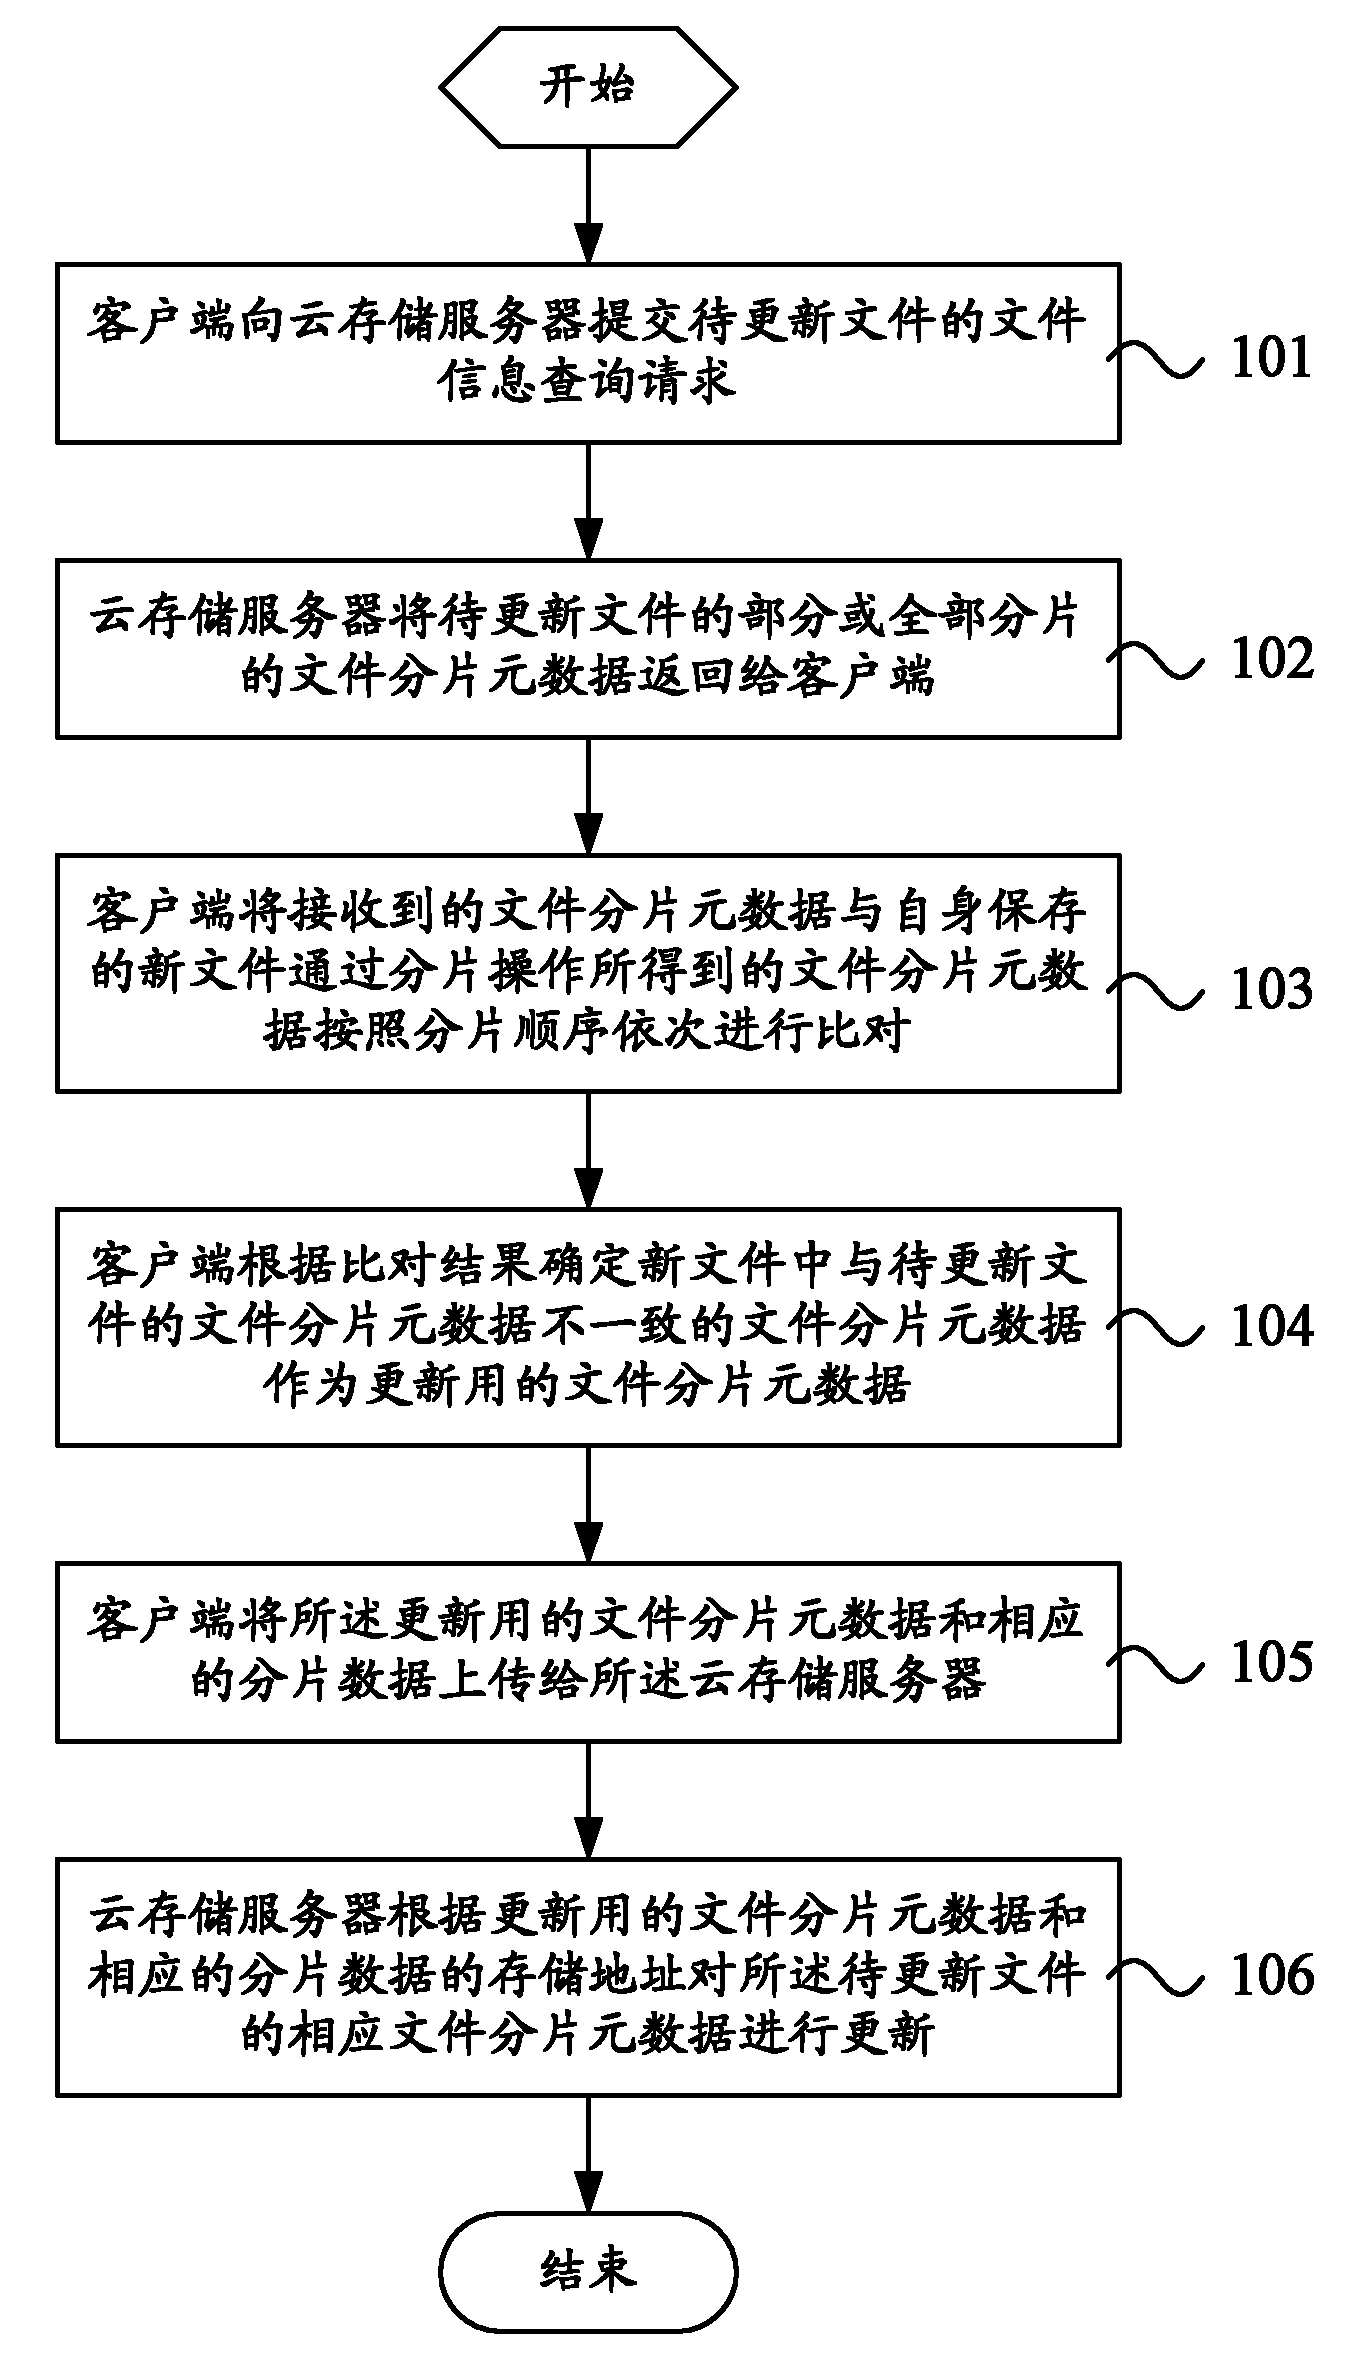 Method and system of fast file updating applied to cloud storage